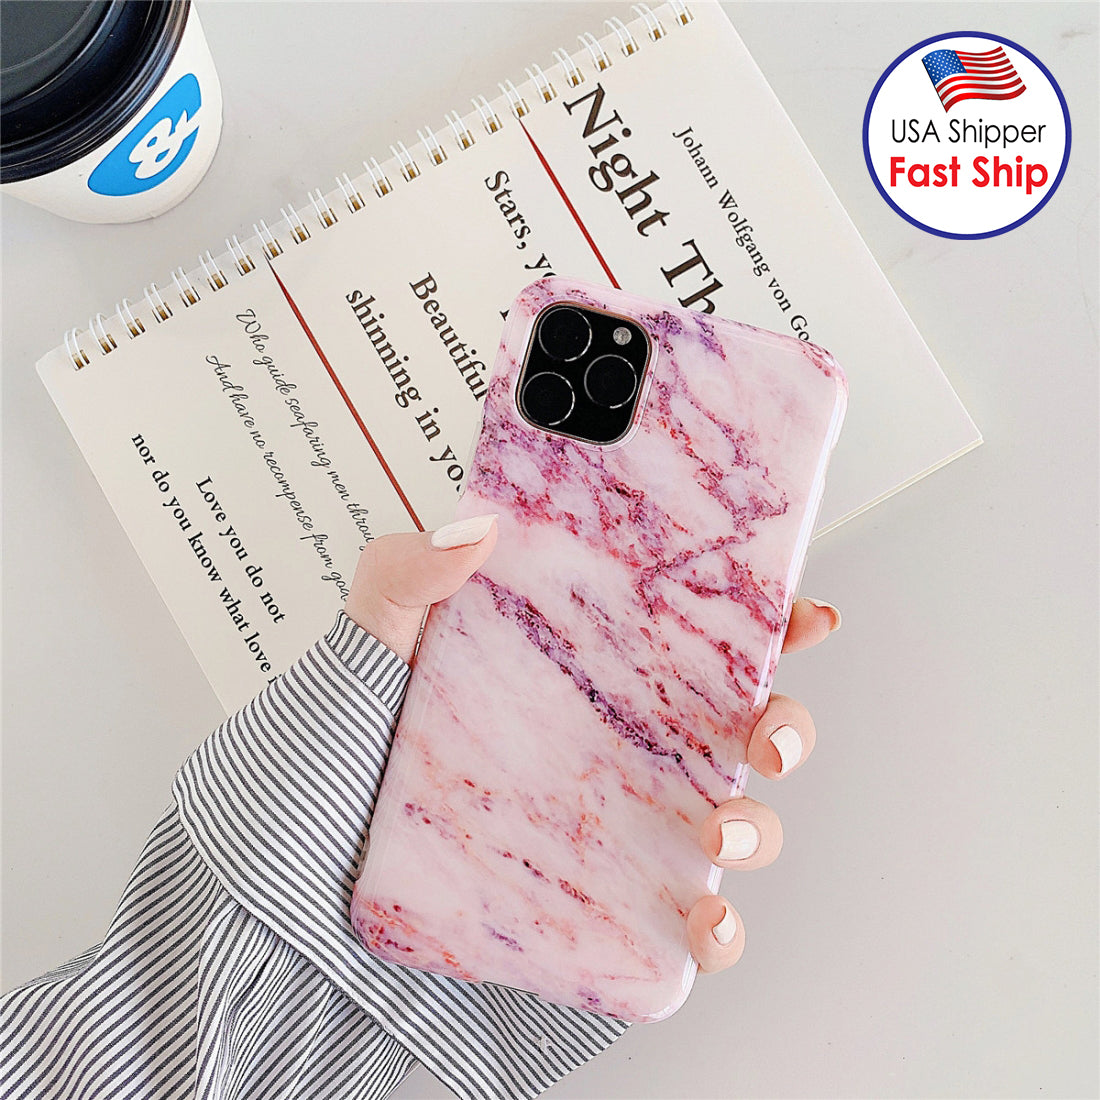 AMZER Marble IMD Soft TPU Protective Case for iPhone 11